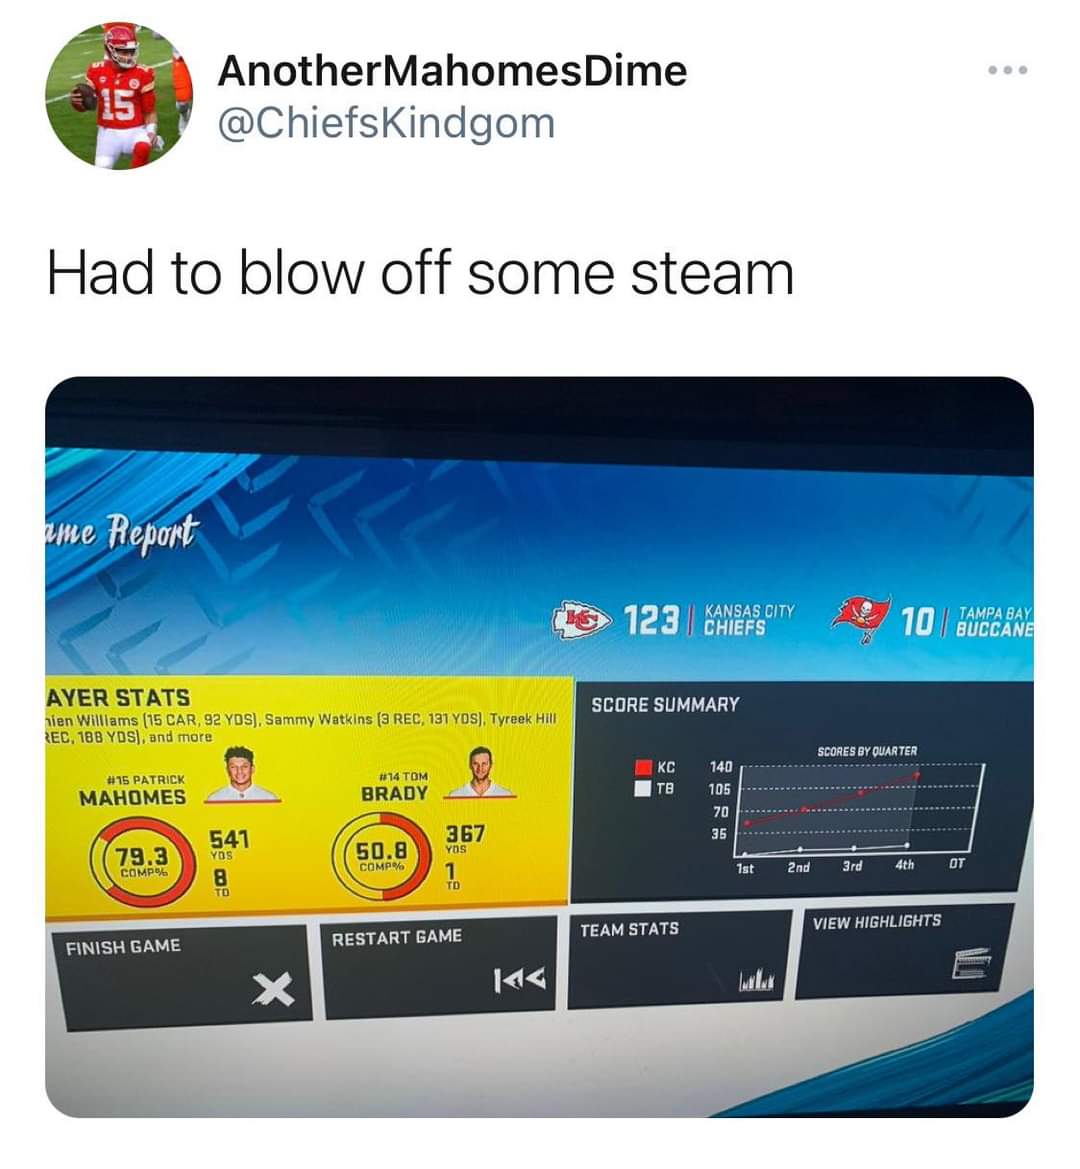 funny memes - multimedia - 15 Another Mahomes Dime Had to blow off some steam ame Report 13 123 Chefs Kansas City 10 Lampa Bay Score Summary Ayer Stats nien Williams 15 Car, 92 Yds, Sammy Watkins 9 Rec, 131 Yos, Tyreek Hill Ec, 18B Yds, and more Scores By